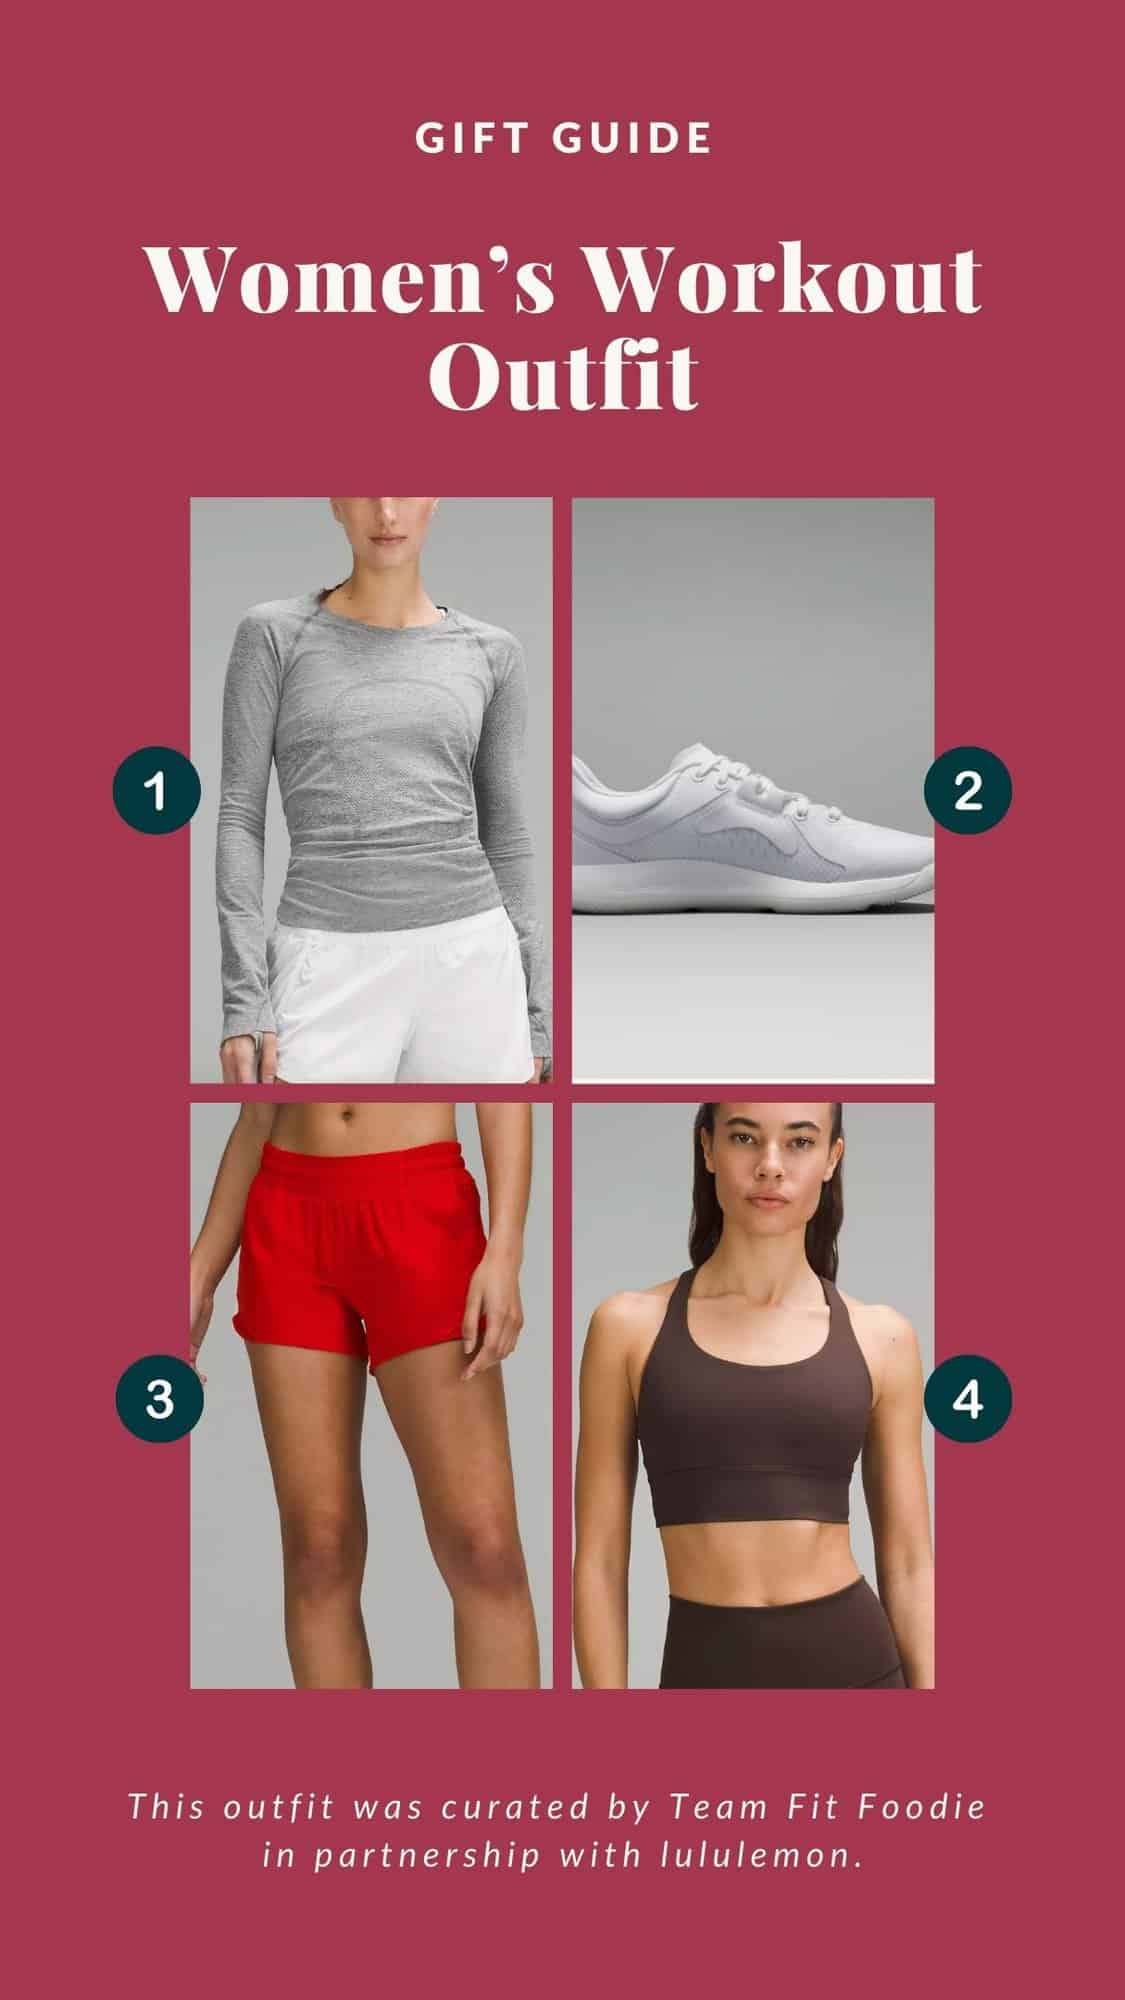 Women's workout outfit gift guide.